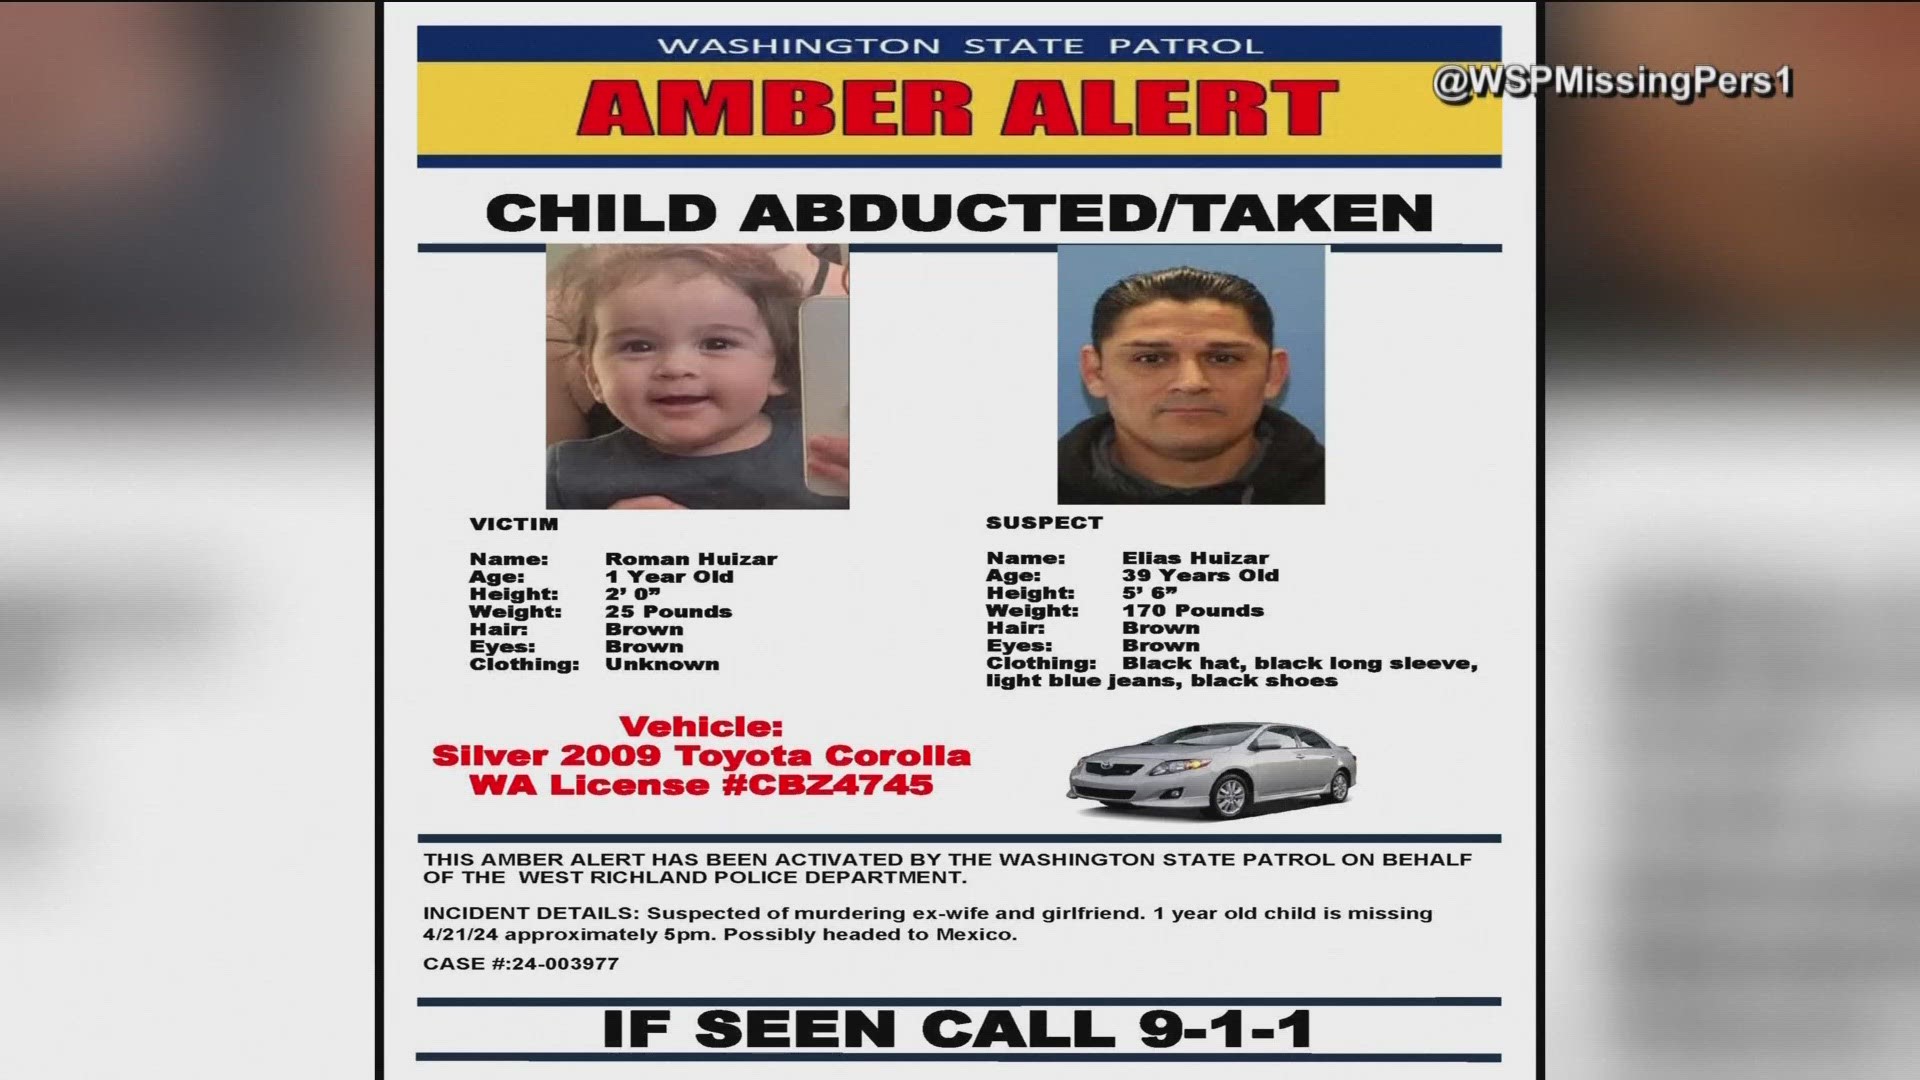 Wanted in connection to the death of two people and the abduction of a toddler in West Richland, Washington.